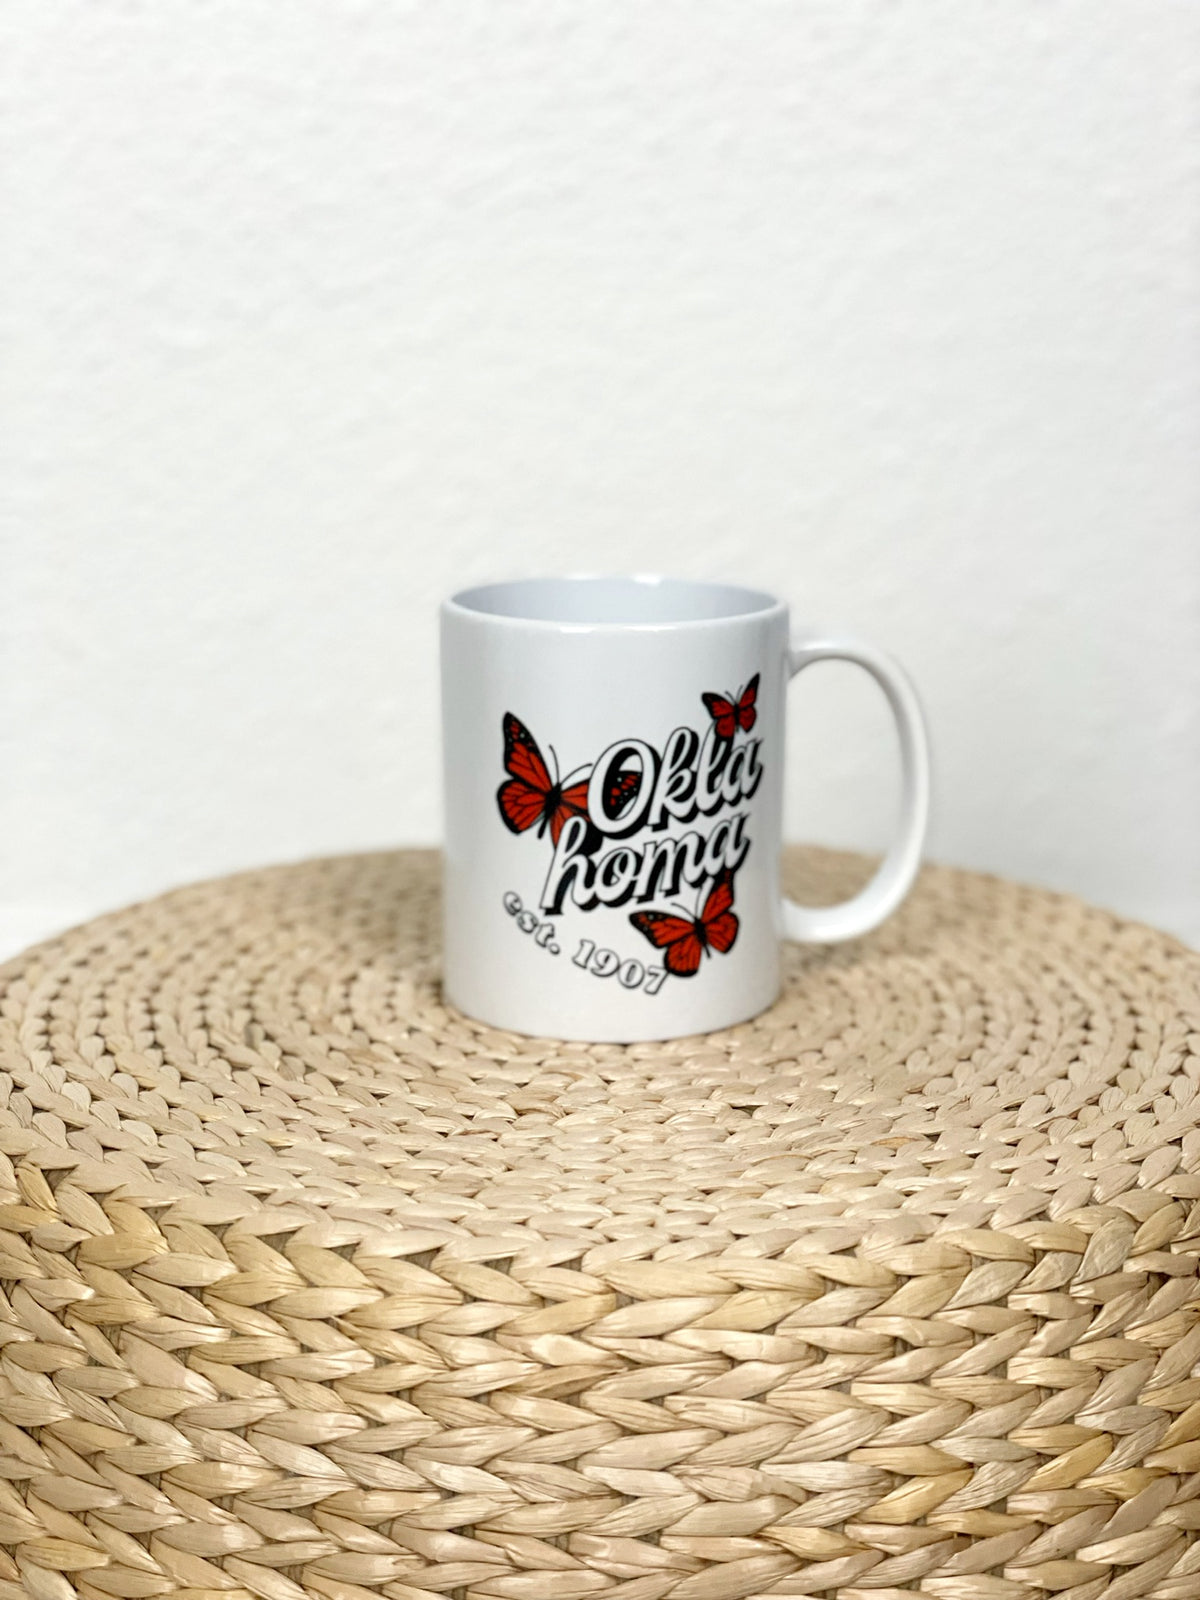 Oklahoma butterfly coffee mug white - Trendy Tumblers, Mugs and Cups at Lush Fashion Lounge Boutique in Oklahoma City